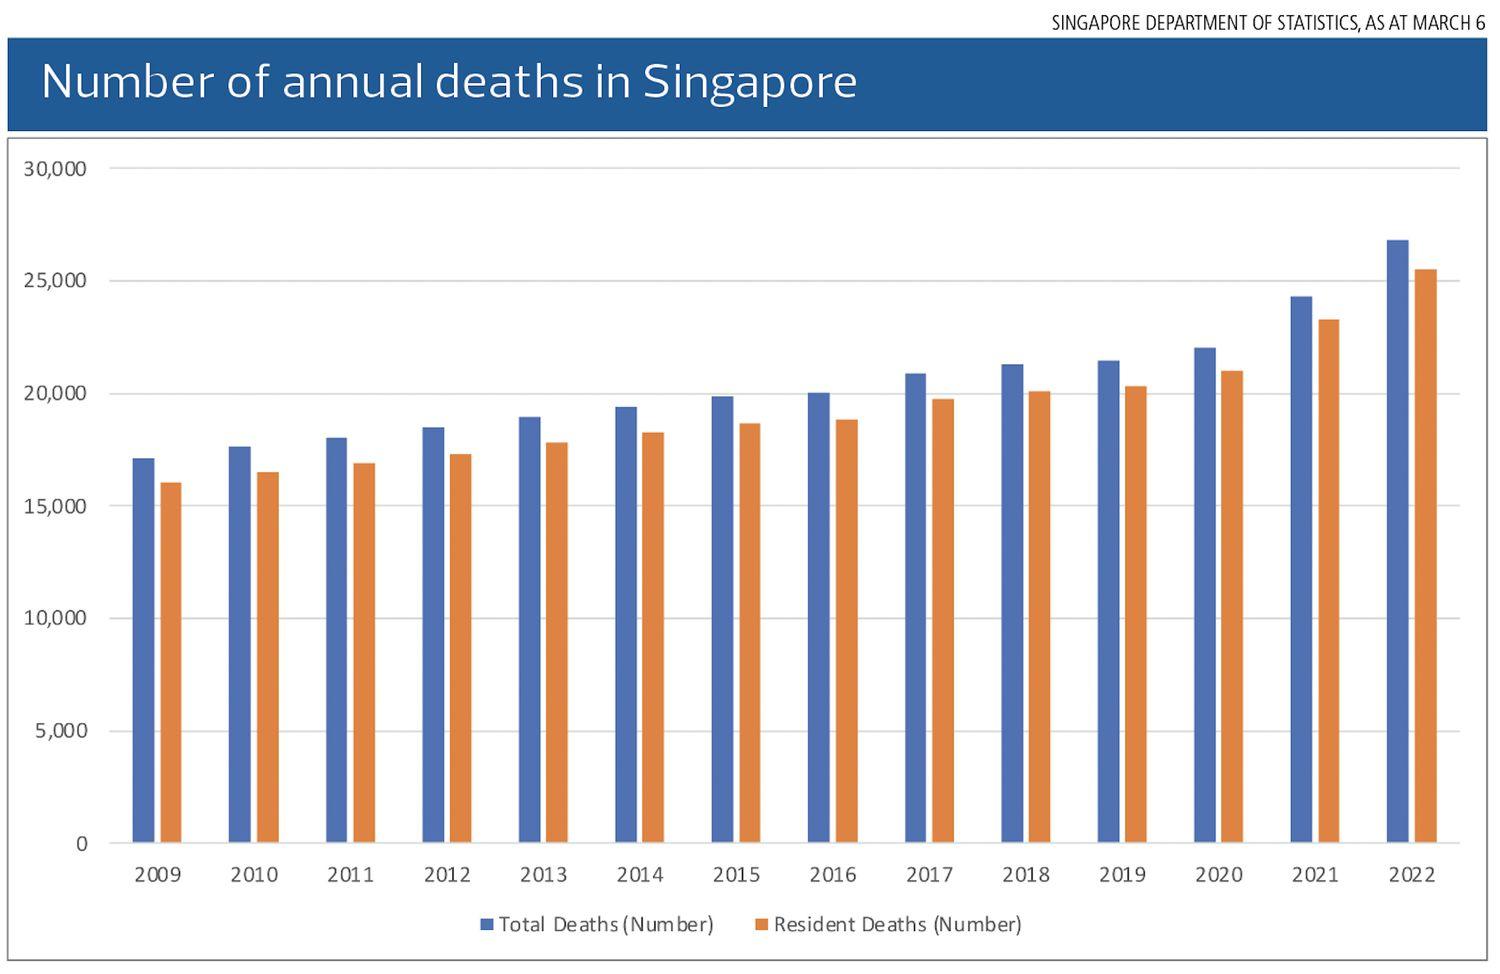 018419-NUMBER-OF-ANNUAL-DEATHS.png.jpg